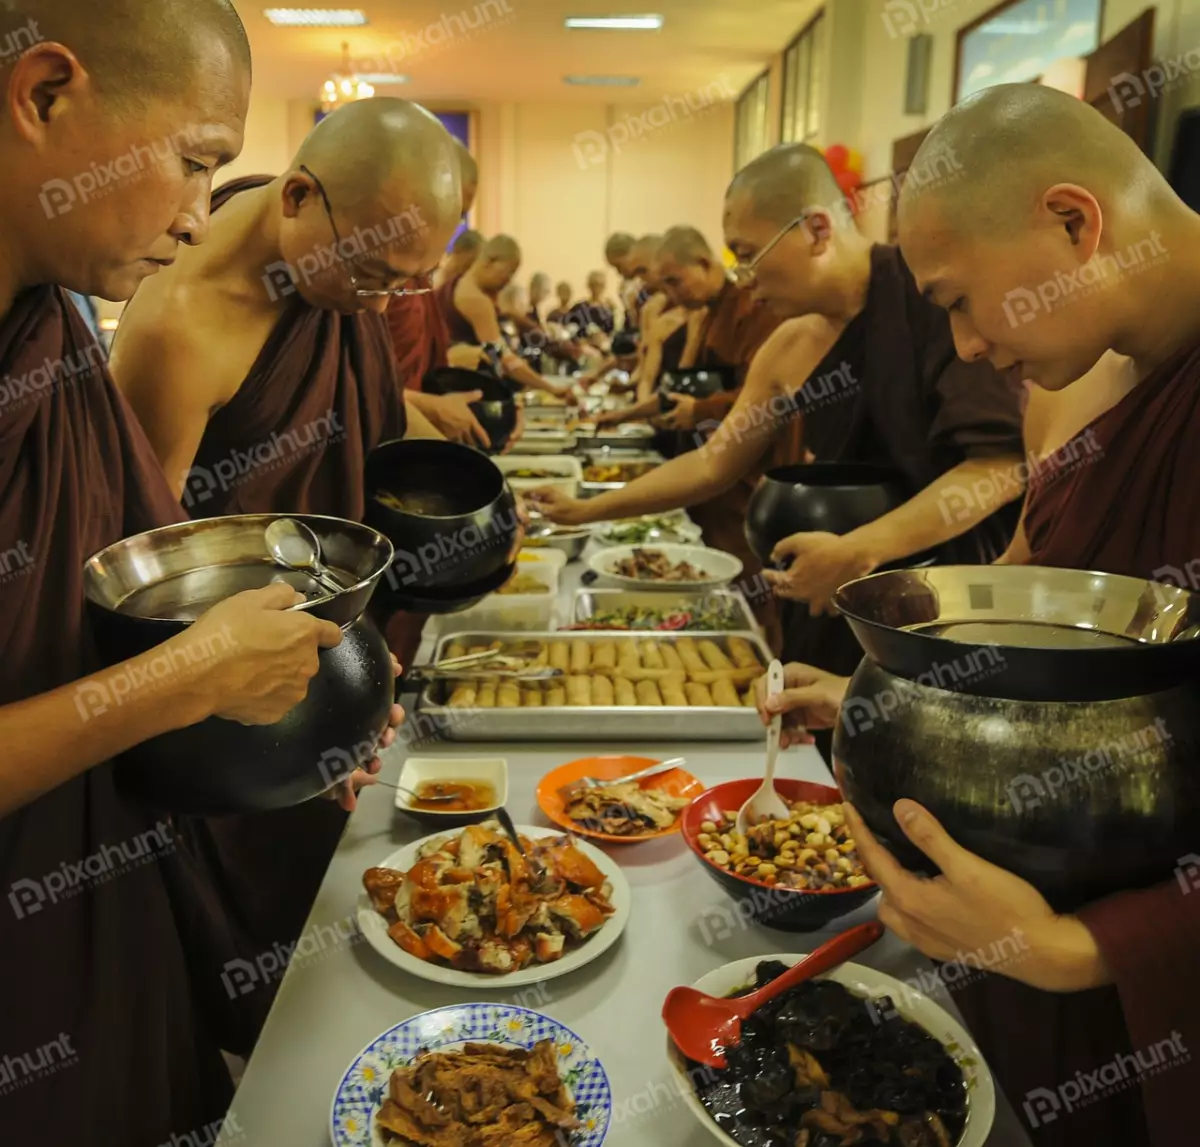 Free Premium Stock Photos Group of Buddhist monks in Thailand holding a bowl